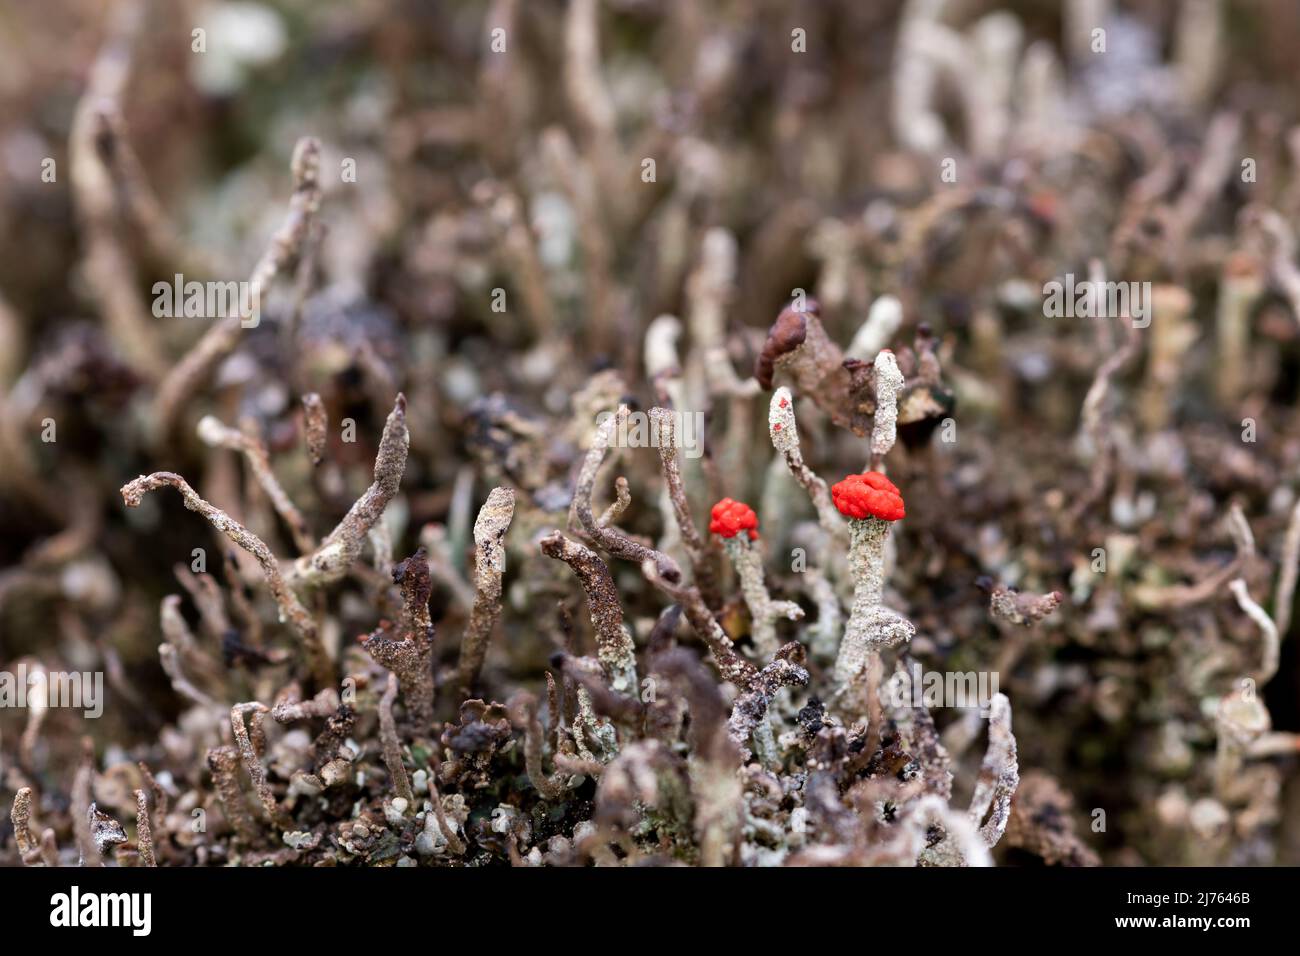 The tiny cup lichen of the algae-fungus symbiosis of Cladonia macilenta on dead wood in the Karwendel mountains Stock Photo